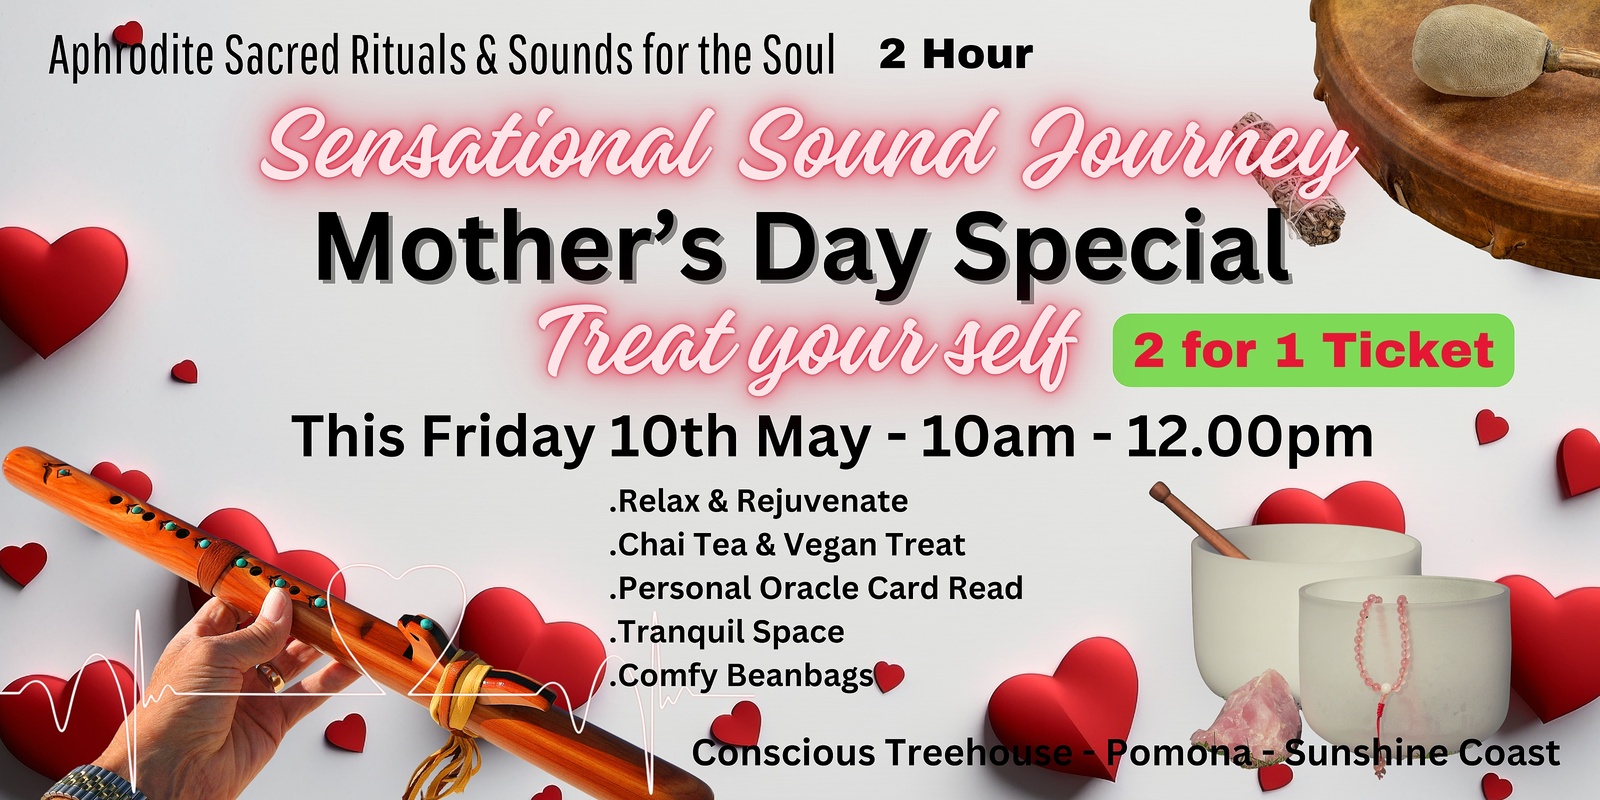 Banner image for MOTHER'S DAY SPECIAL - SENSATIONAL SOUND JOURNEY